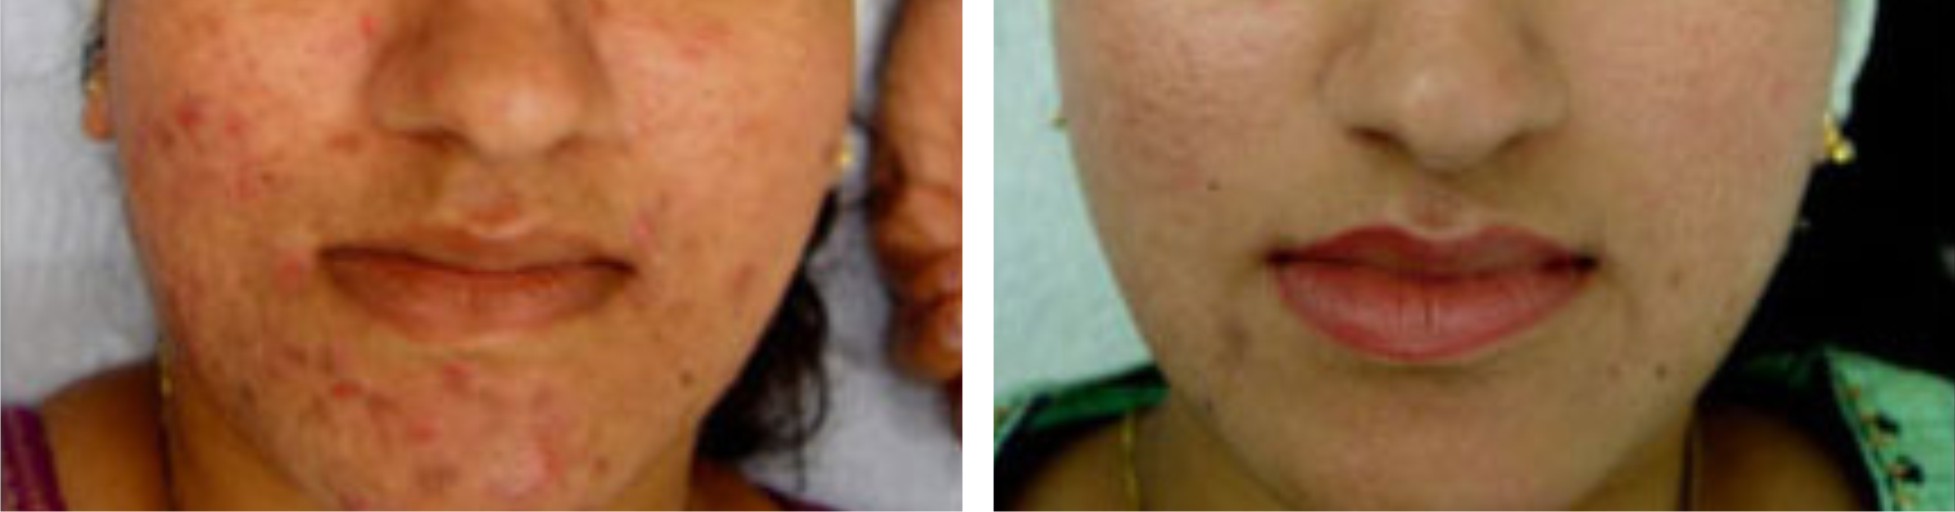 Microdermabrasion Image Two